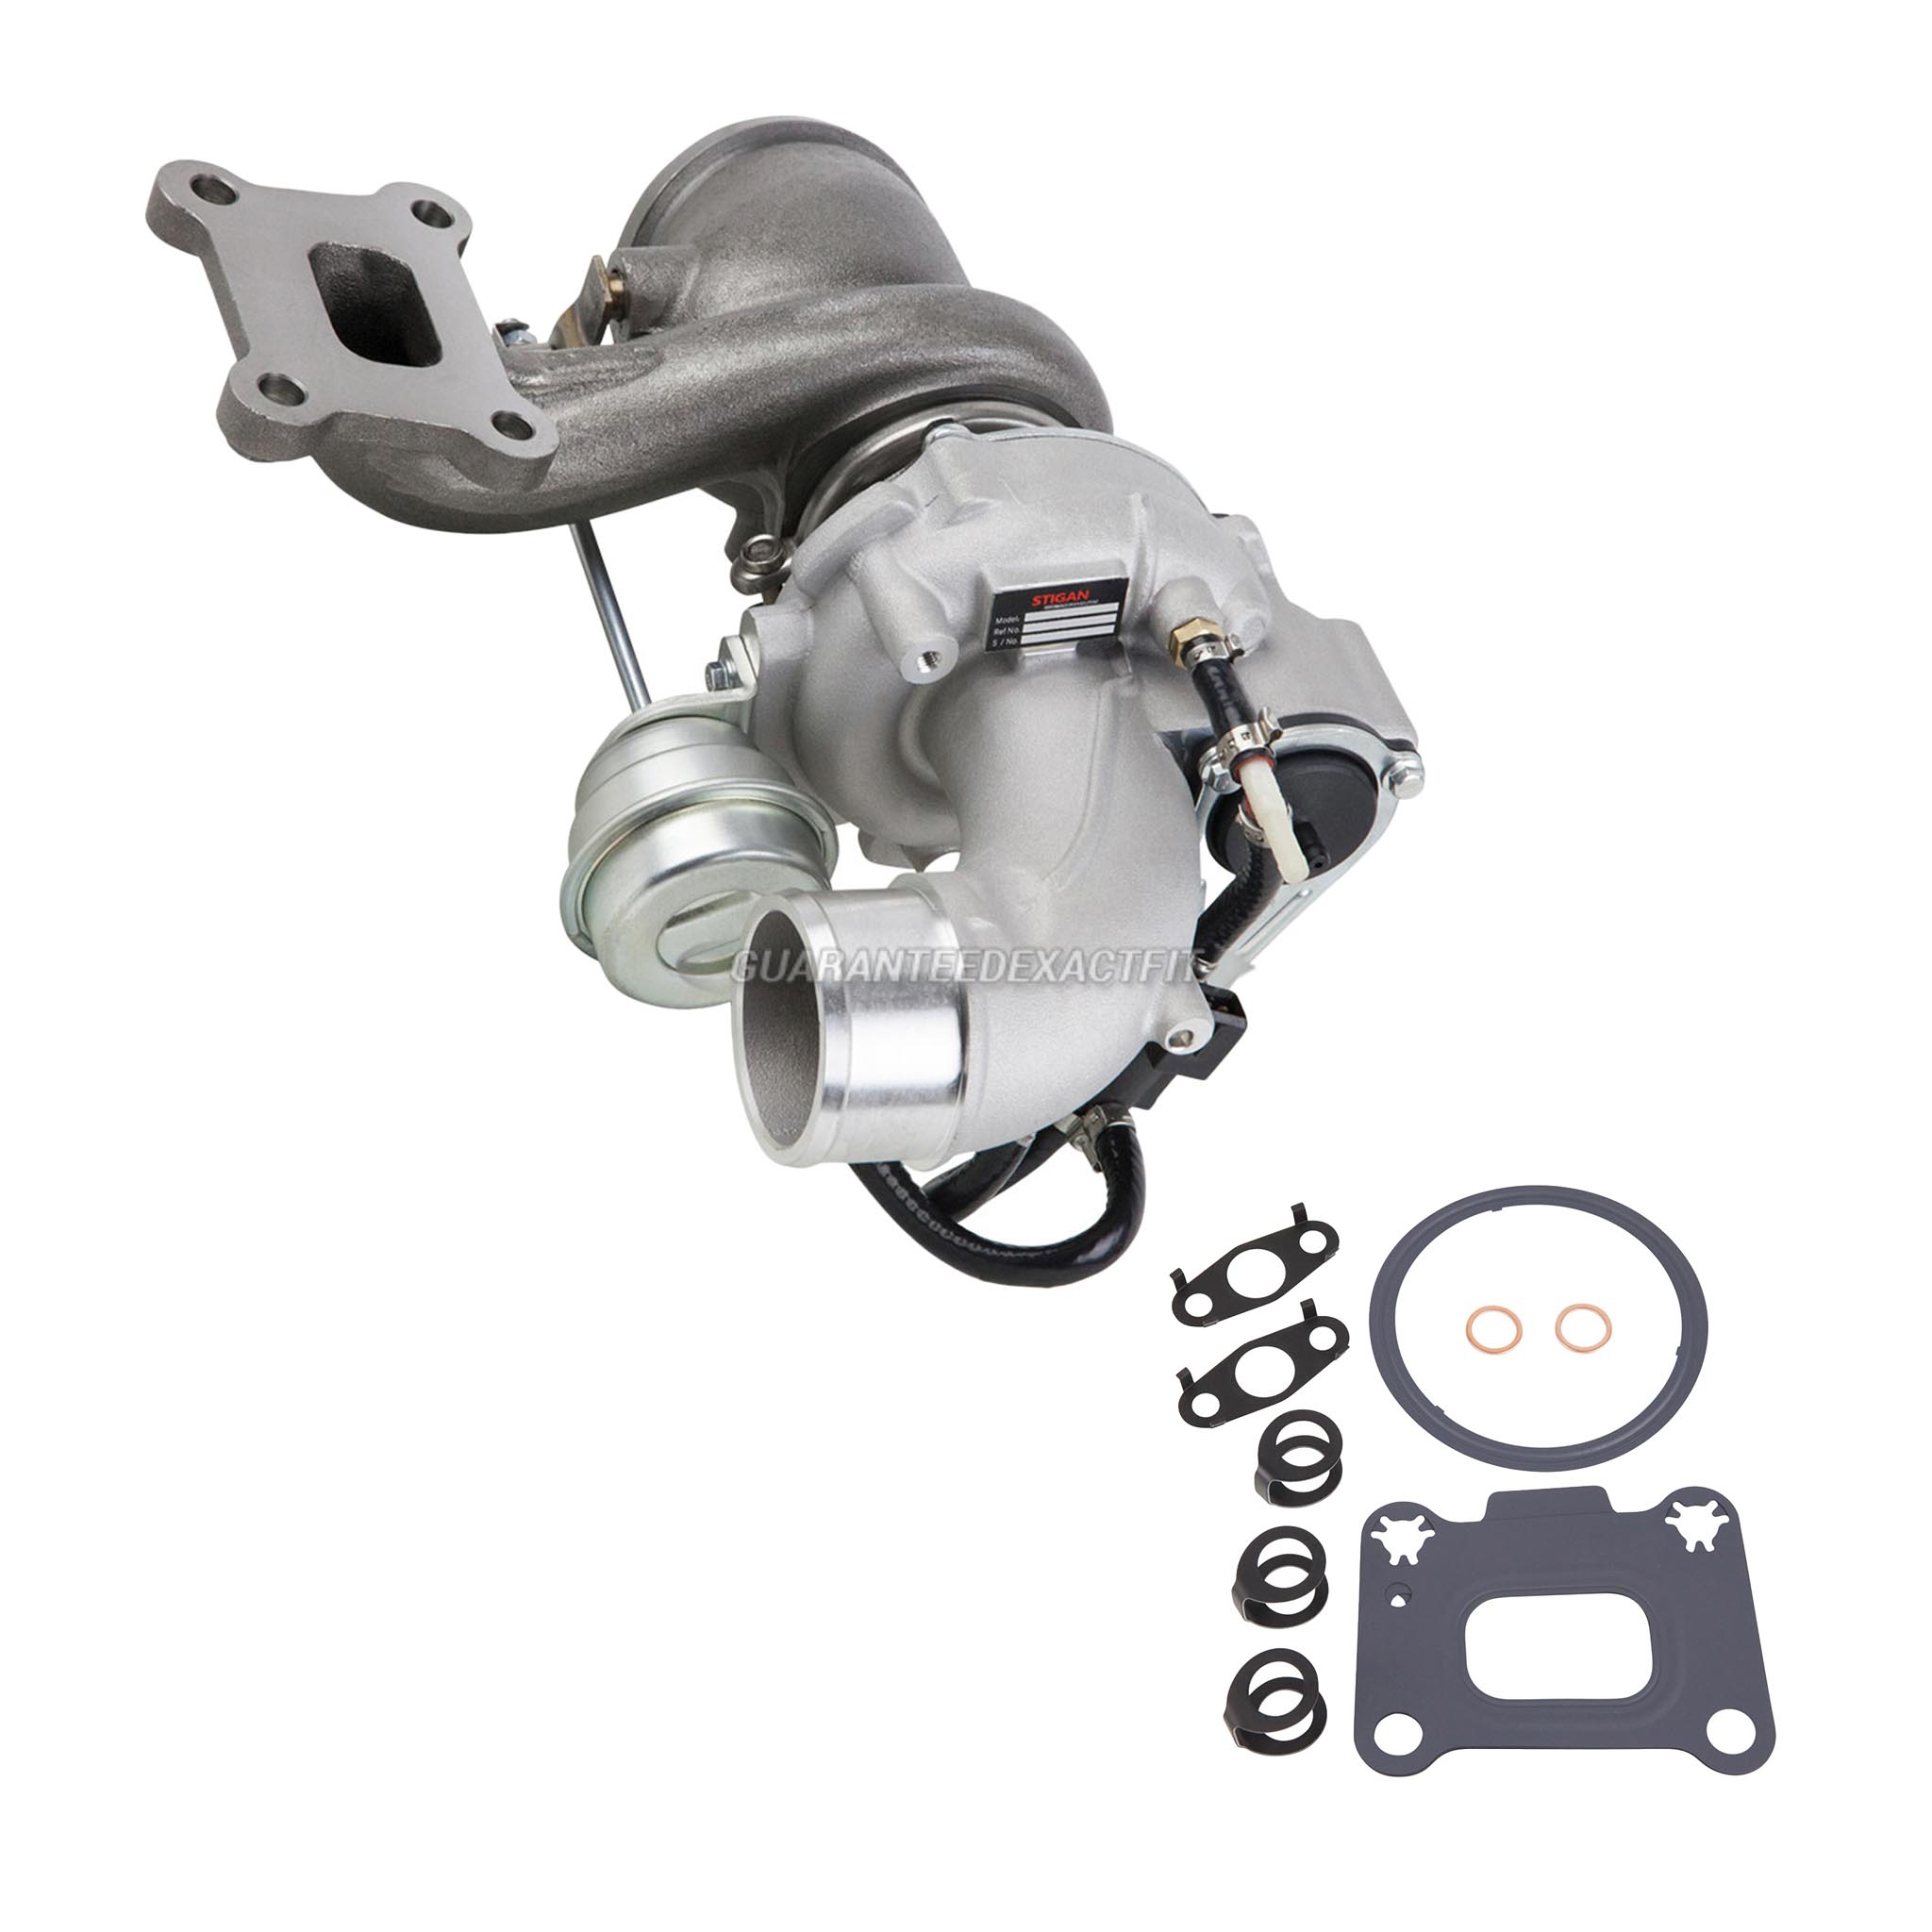 2013 Ford Escape turbocharger and installation accessory kit 